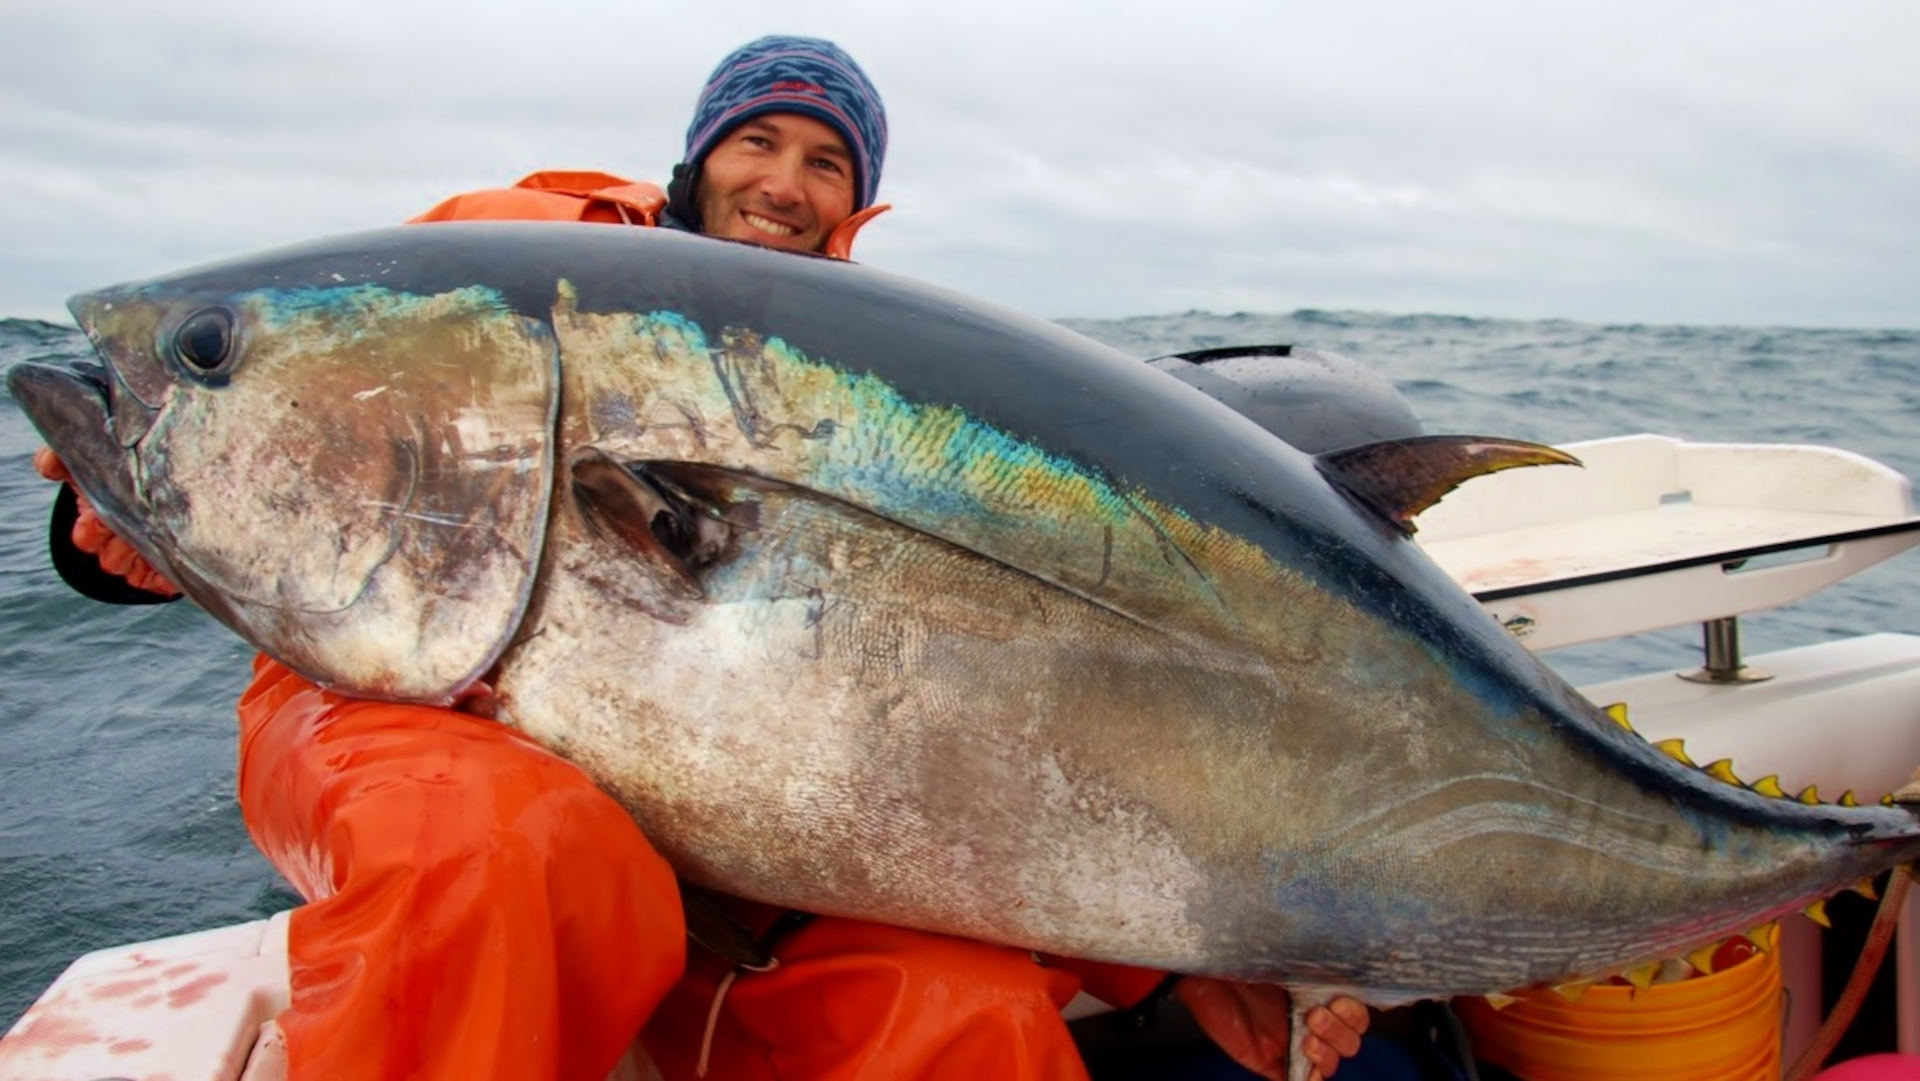 An Atlantic bluefin tuna caught off of Cape Cod. The fish can grow to well over a thousand pounds.